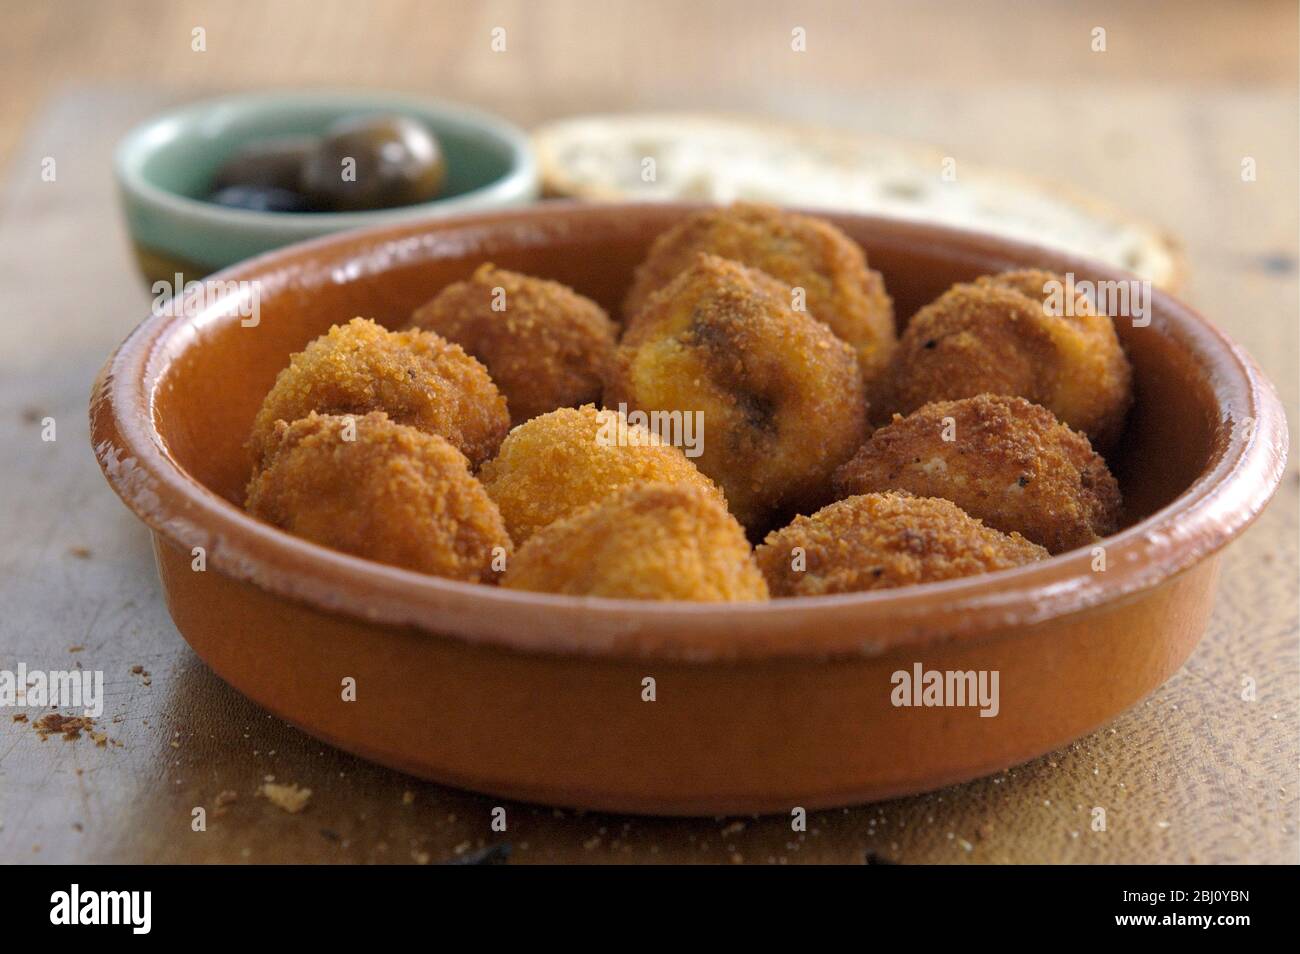 Italian mushrooms stuffed with ricotta chilli and garlic, coated with breadcrumbs and deep fried. - Stock Photo